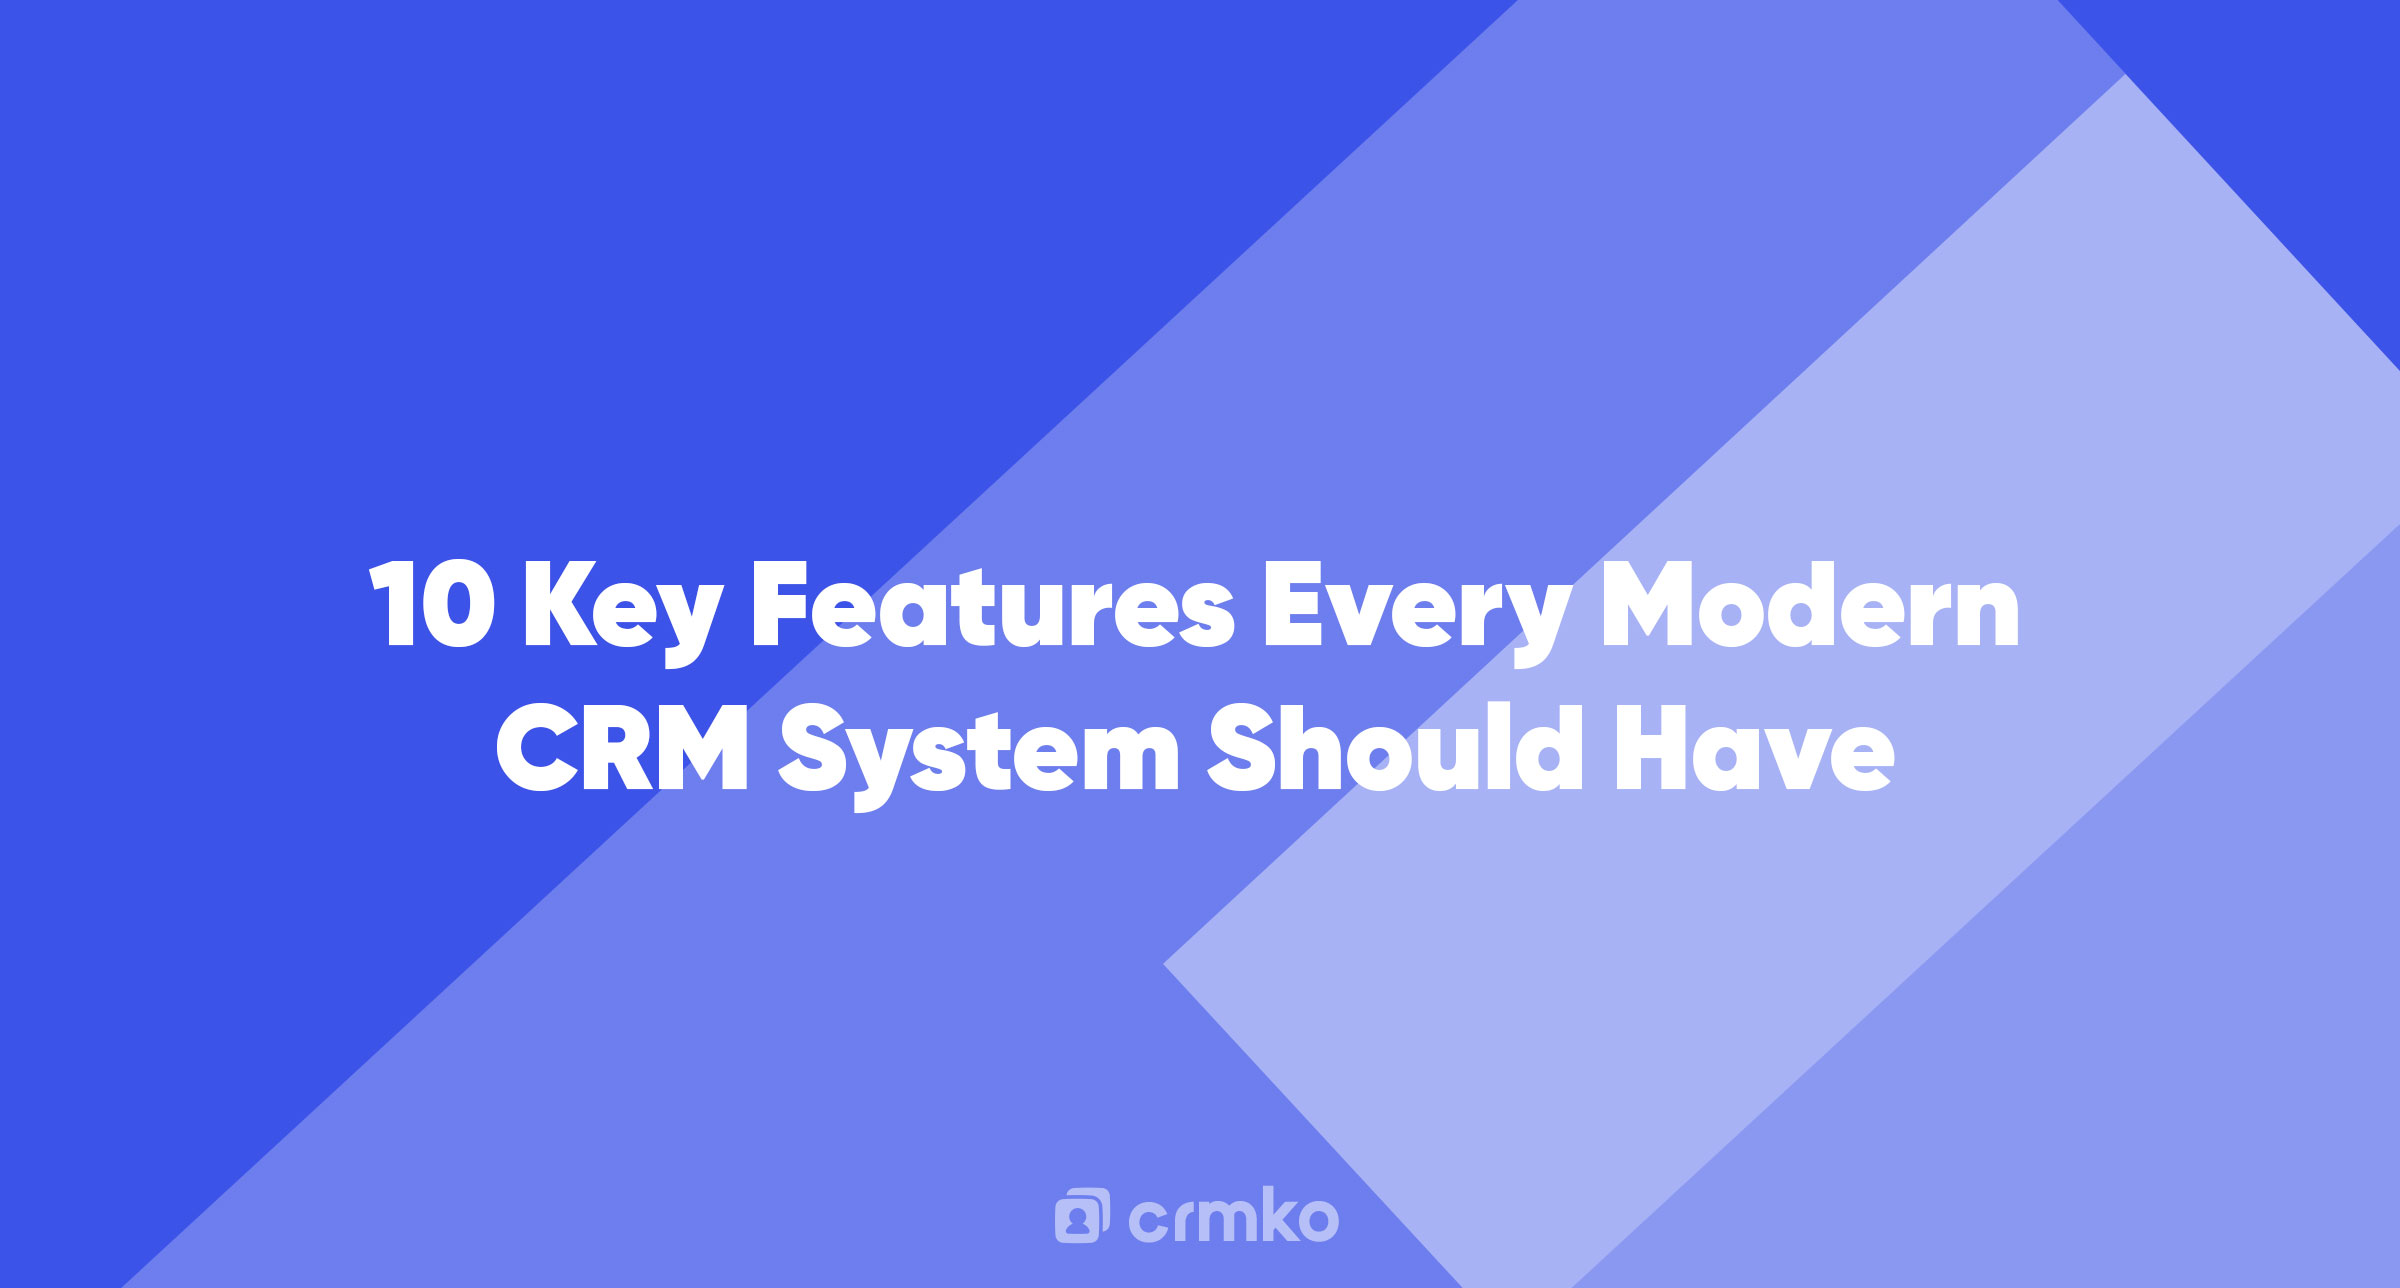 Article | 10 Key Features Every Modern CRM System Should Have